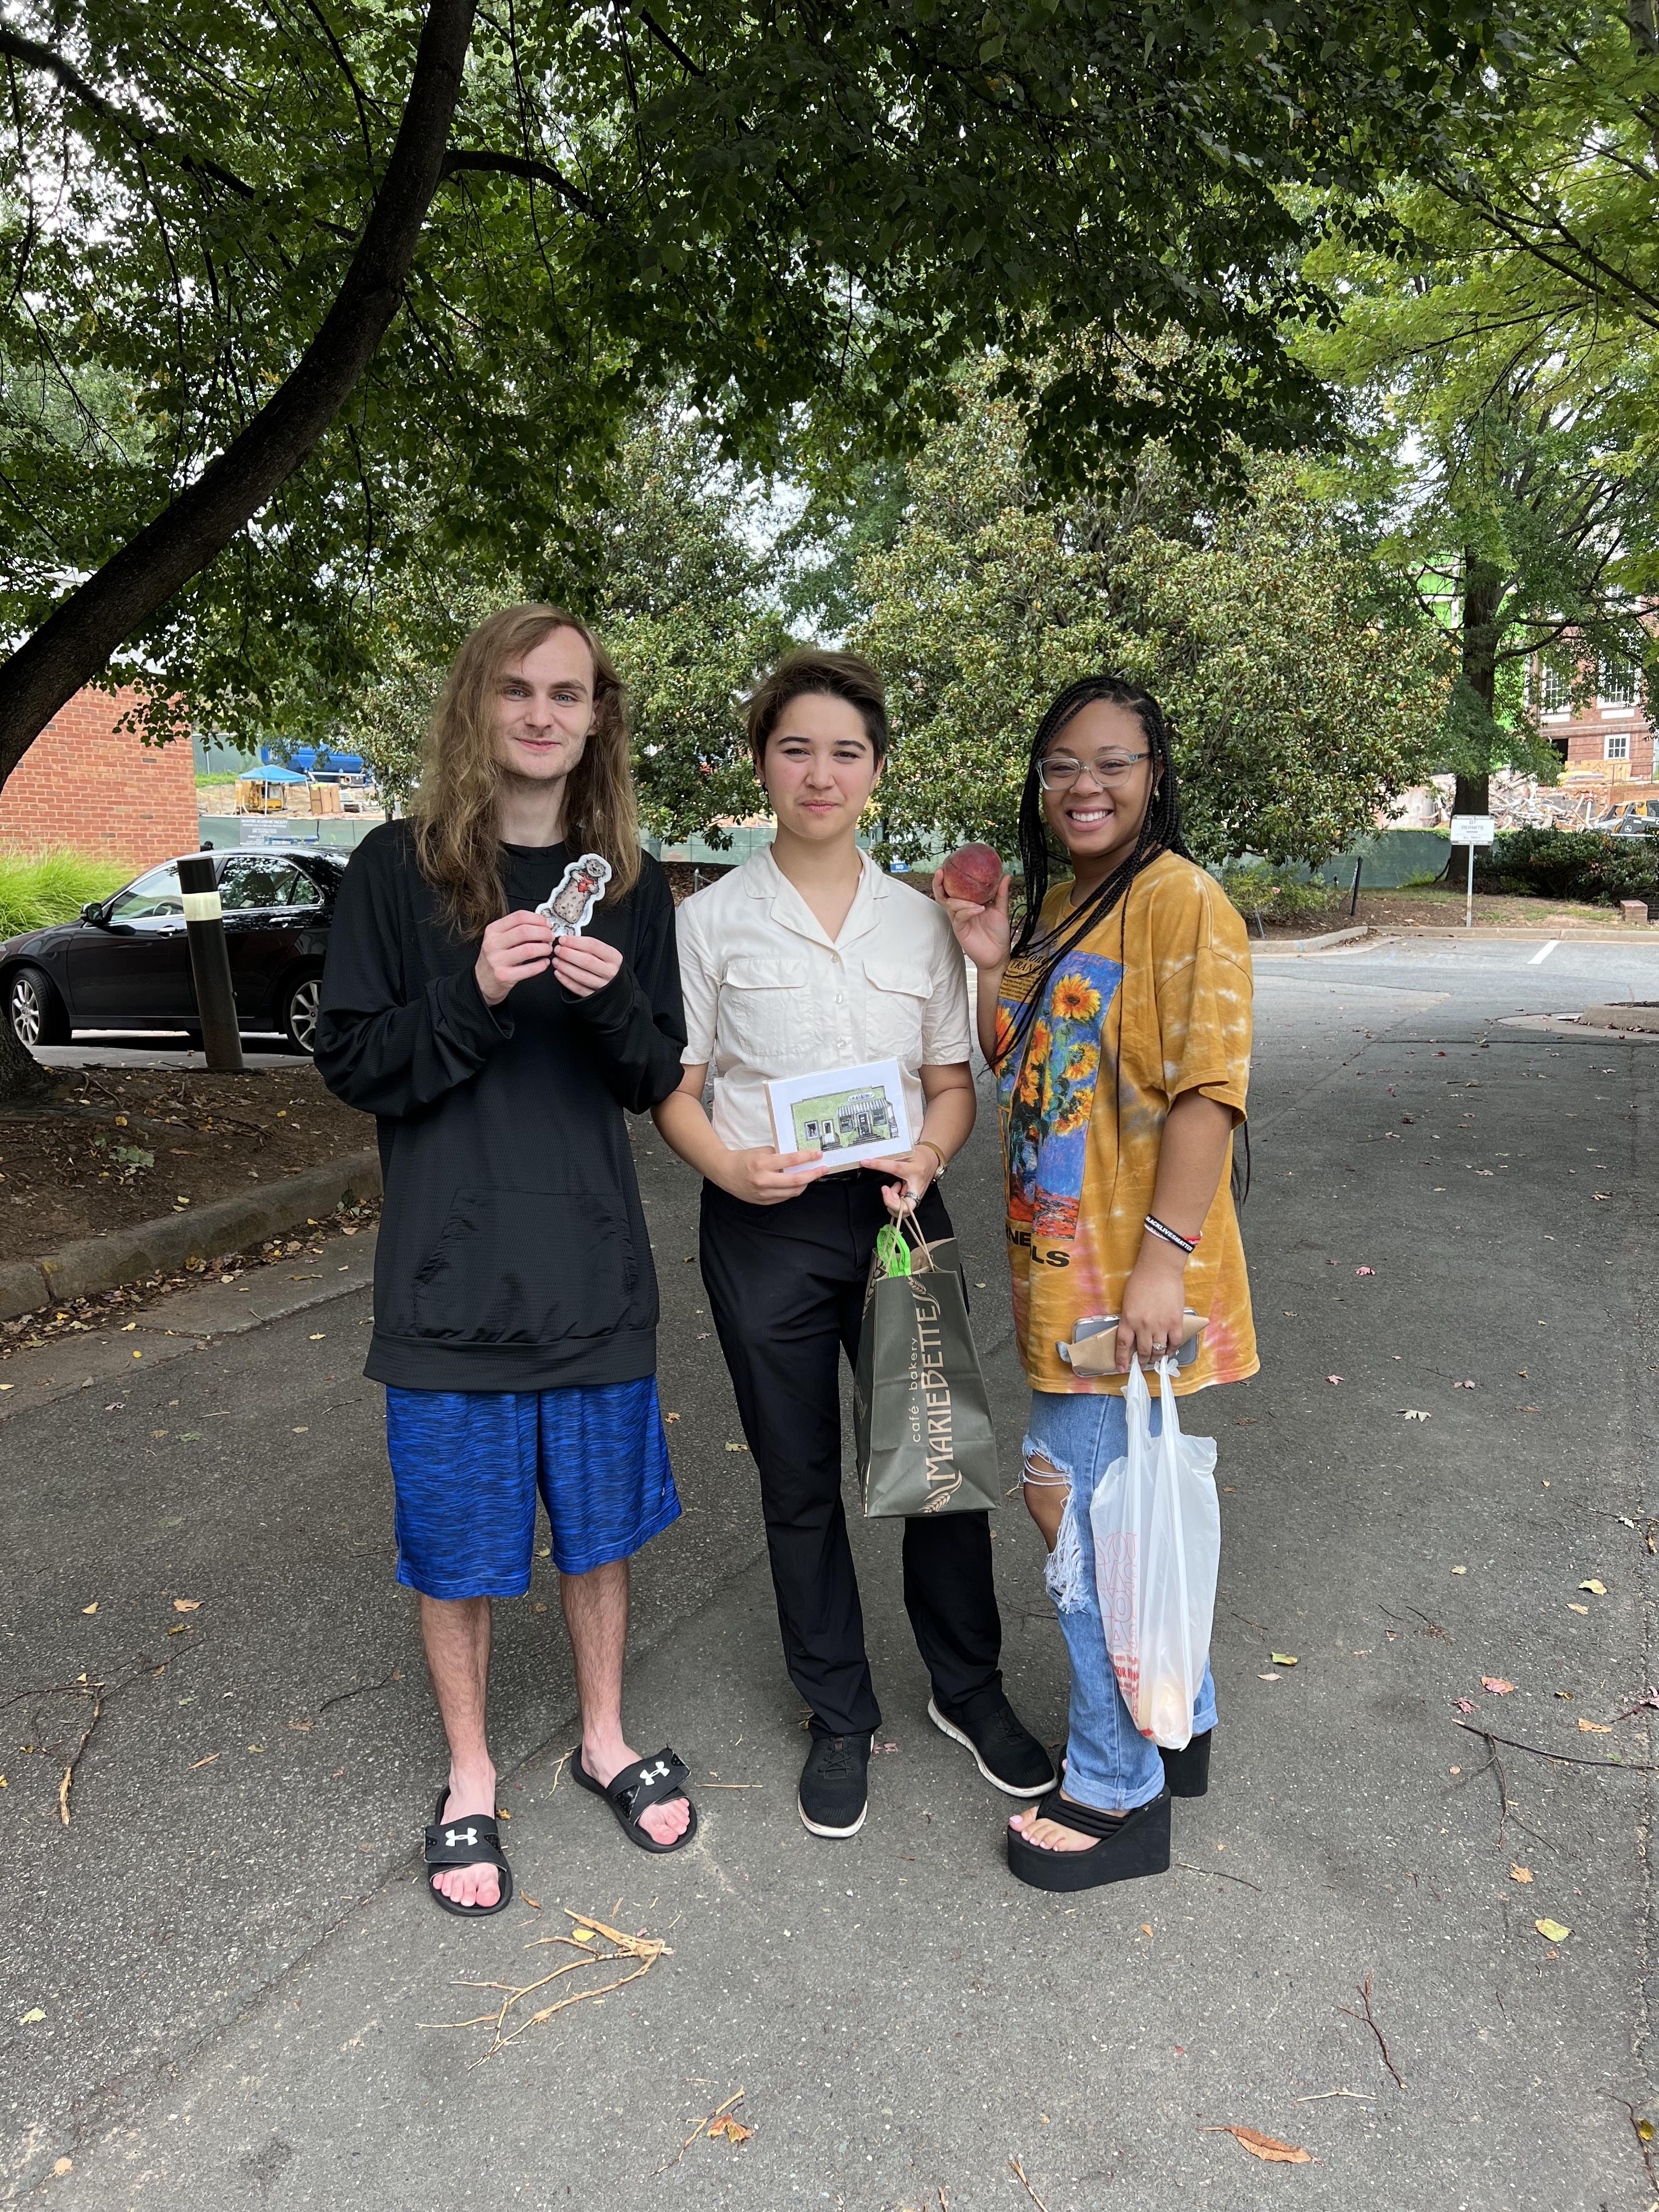 Members of the ASL pod holding their purchases from the farmer's market.